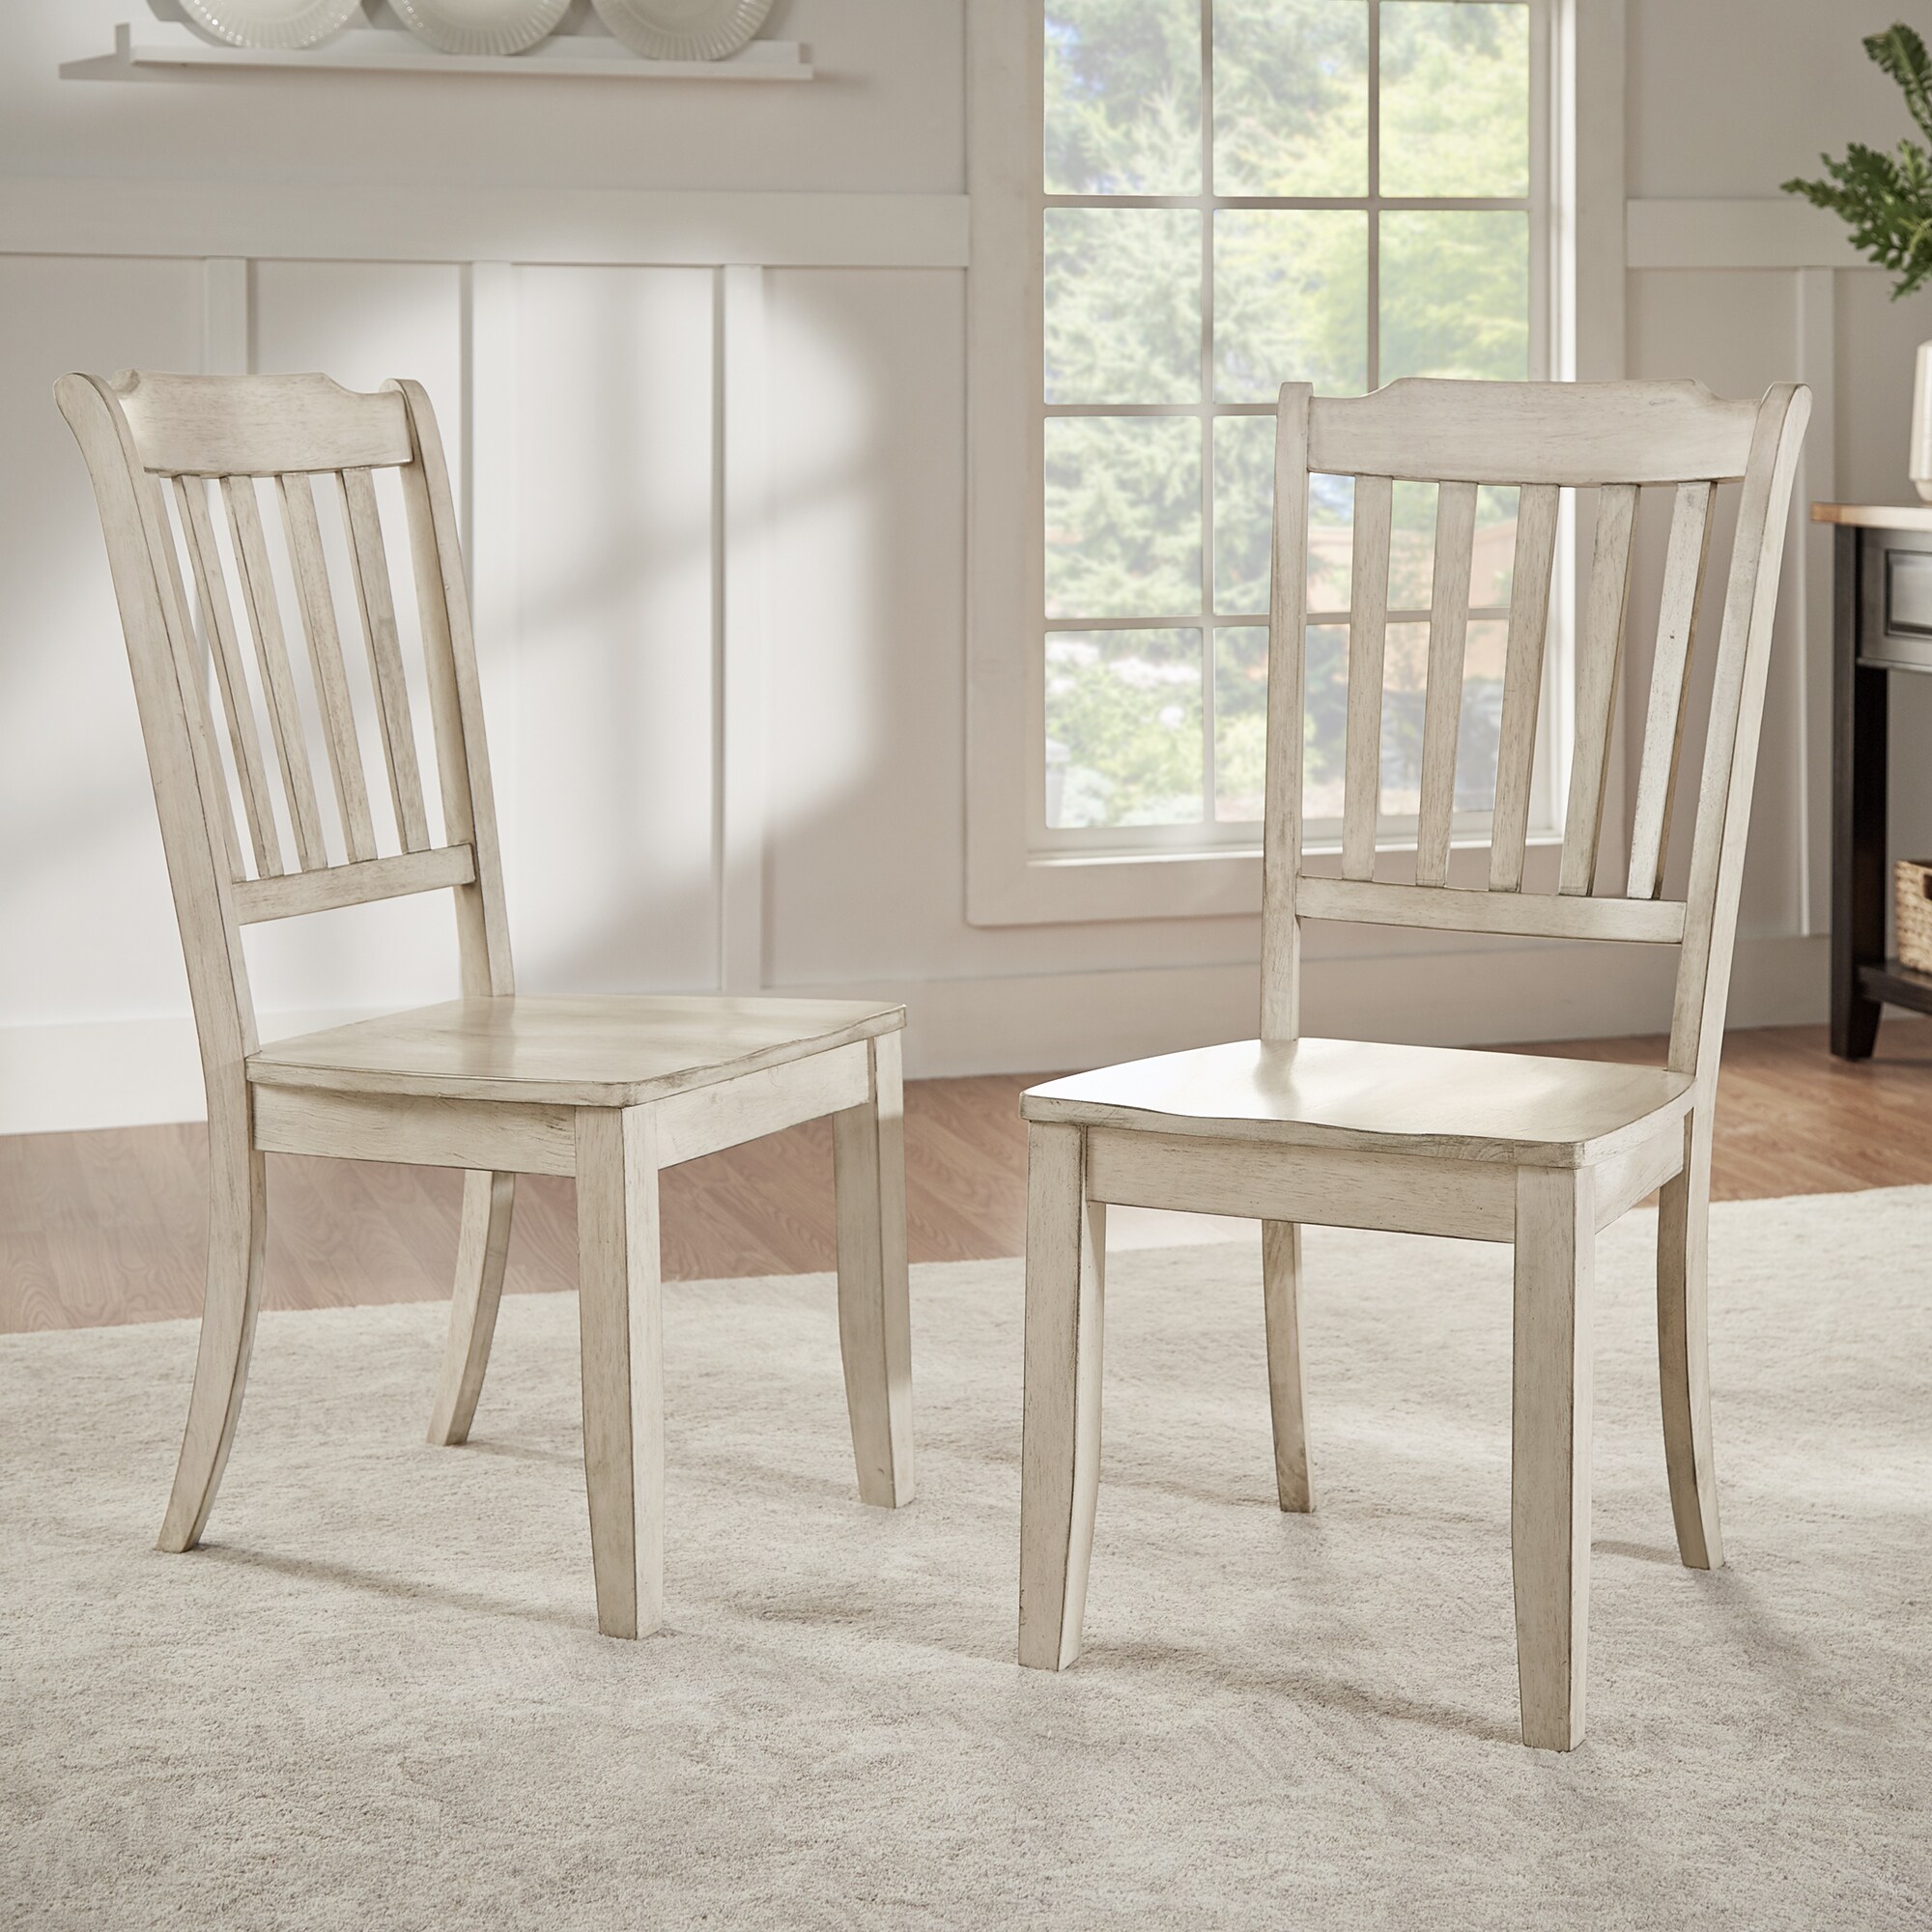 Eleanor Slat Back Wood Dining Chair (Set of 2) by iNSPIRE Q | eBay